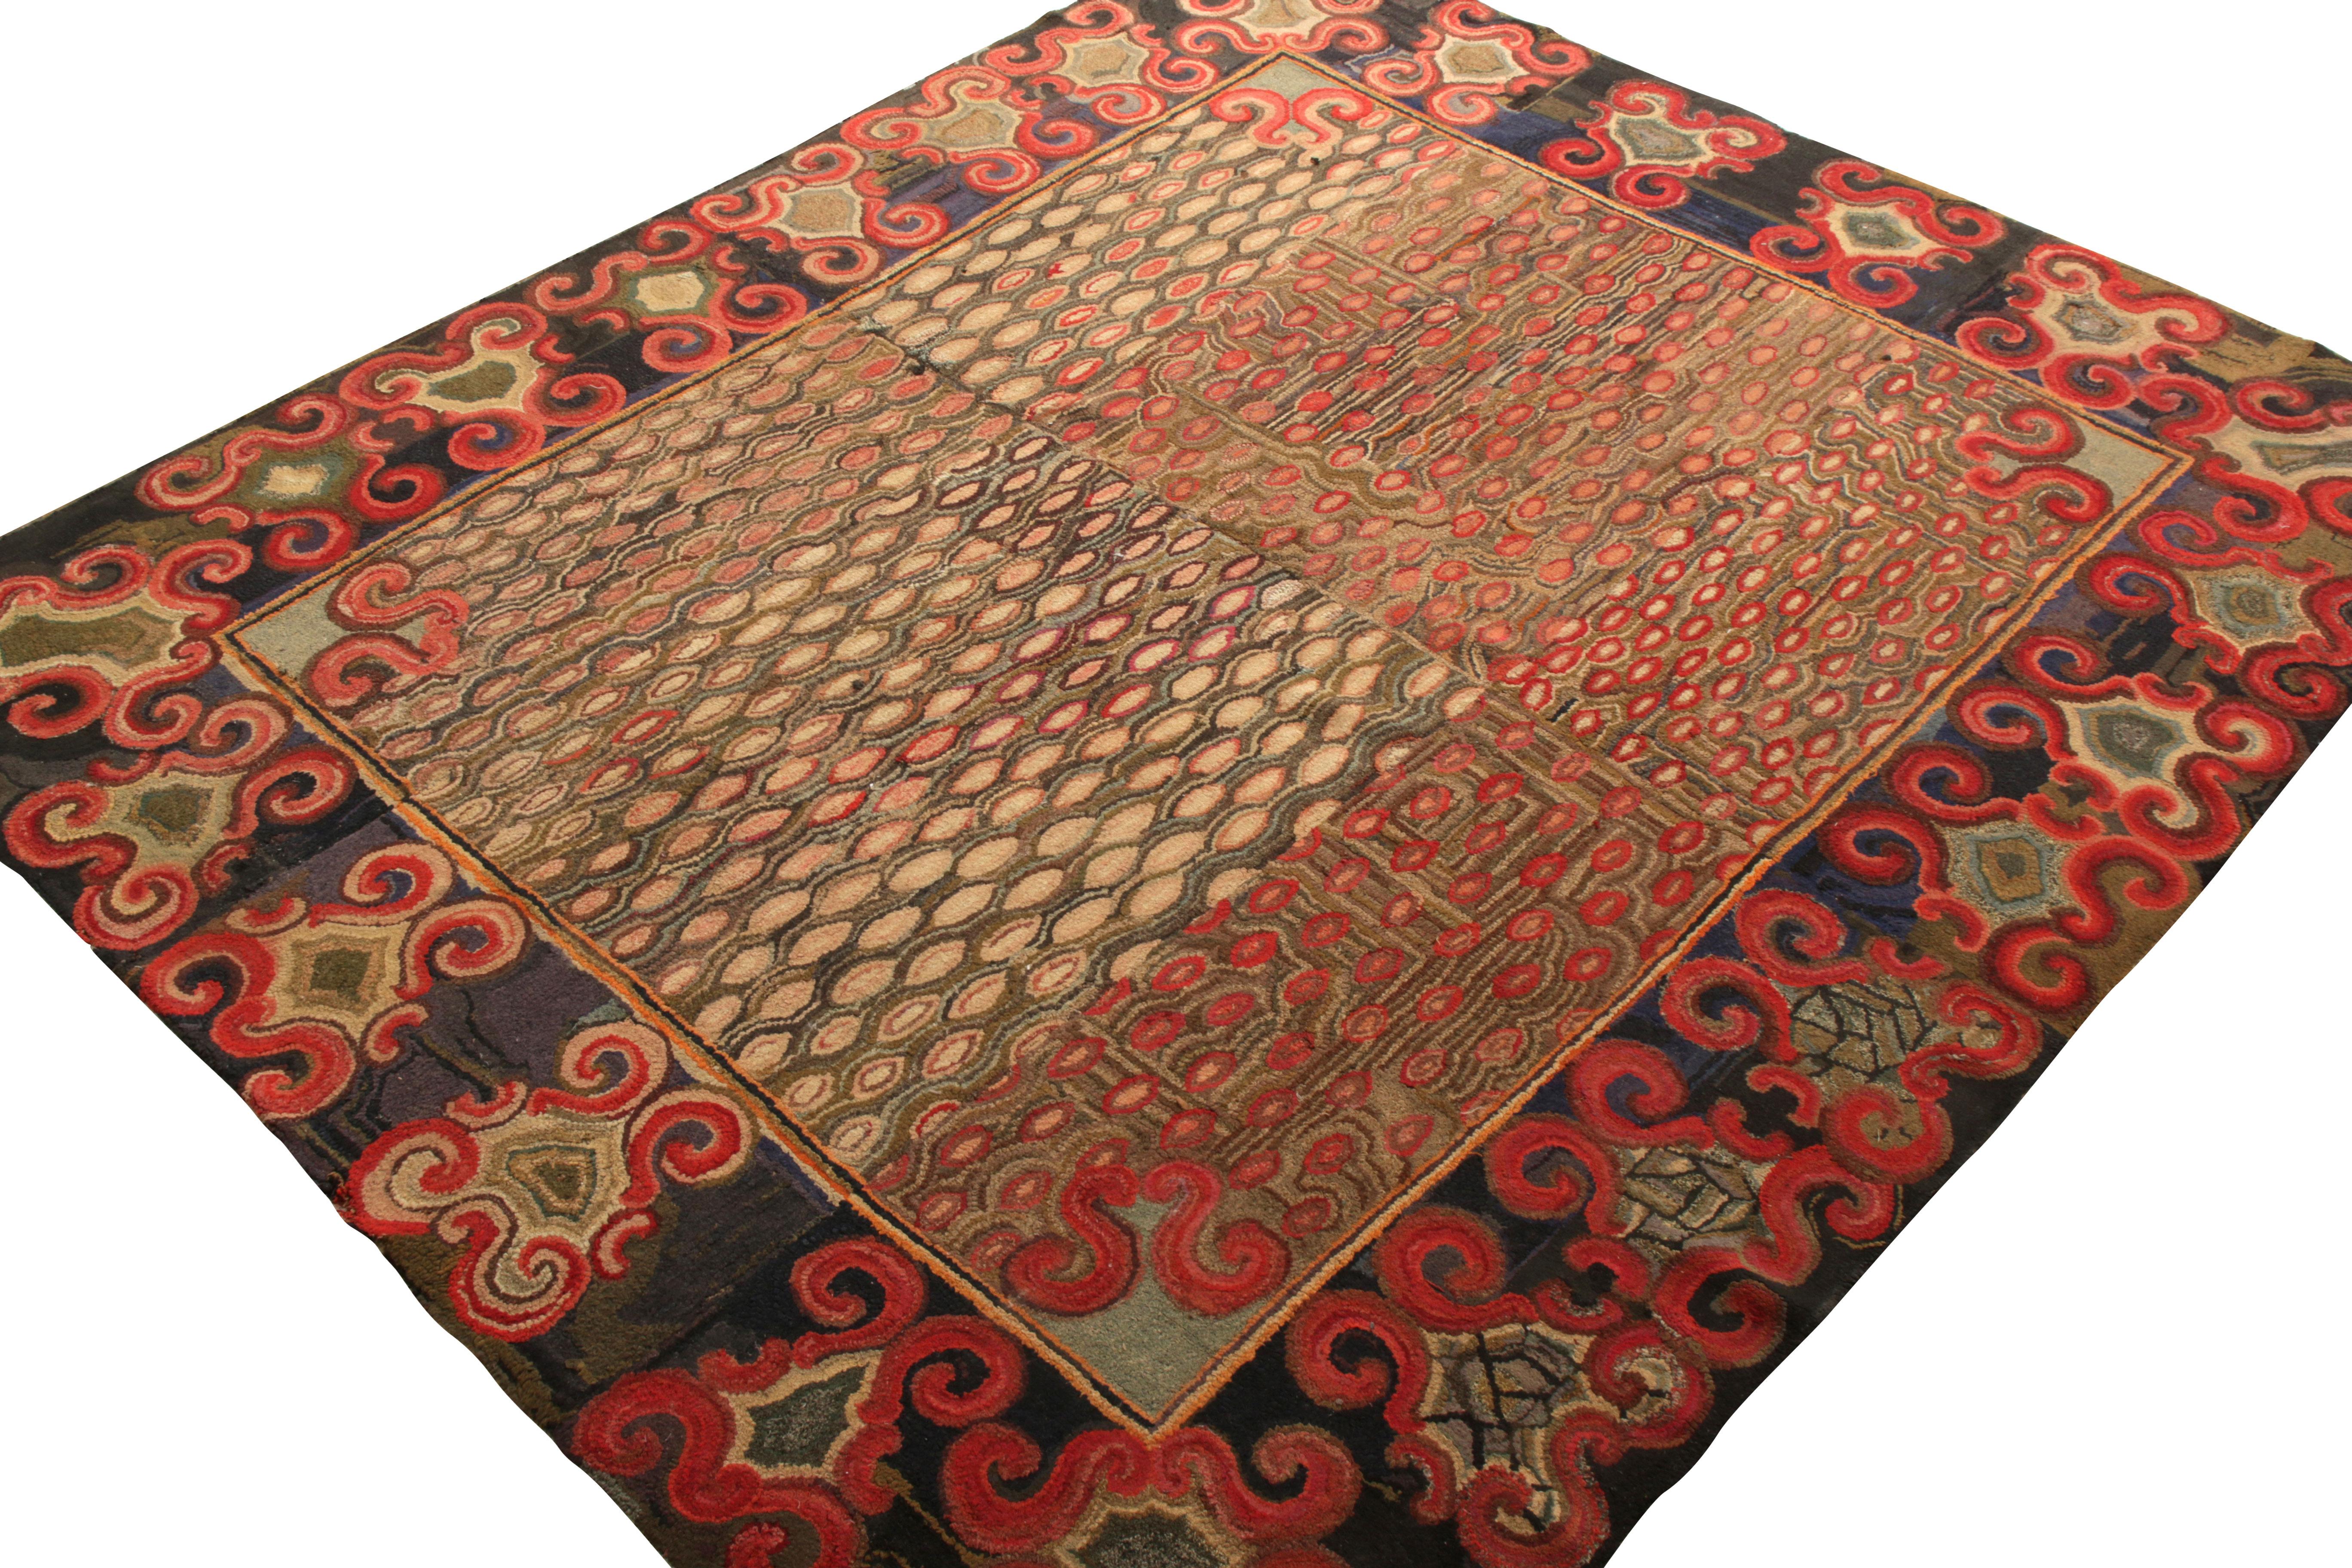 Other Antique Hand Rug in All over Red, Beige-Brown Geometric Pattern For Sale